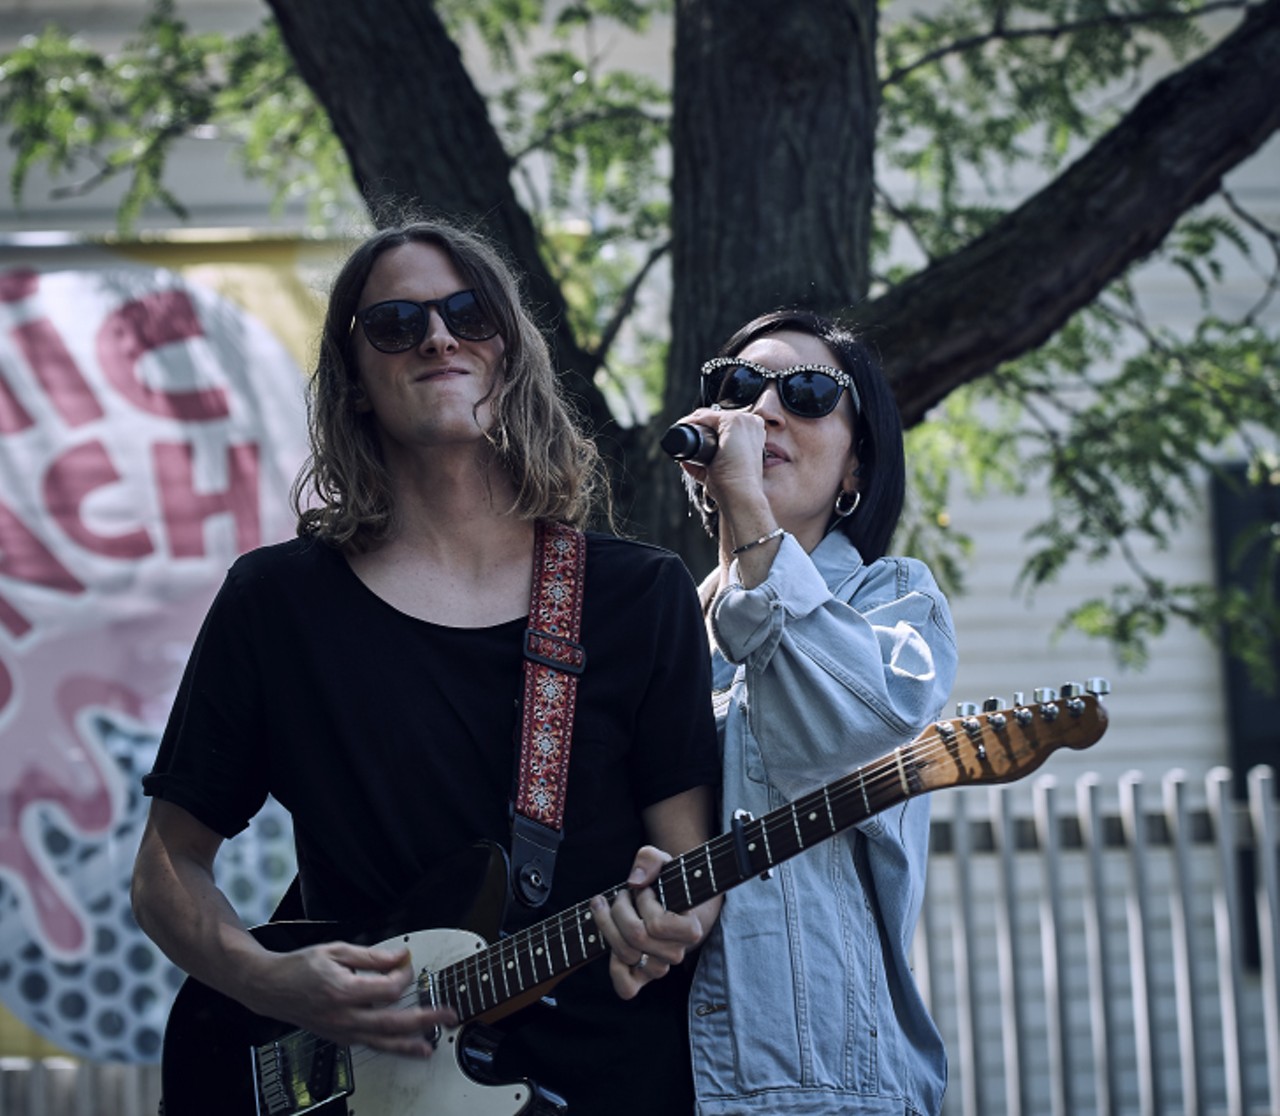 Everything we saw at the Shaed show at Ann Arbor's Sonic Lunch